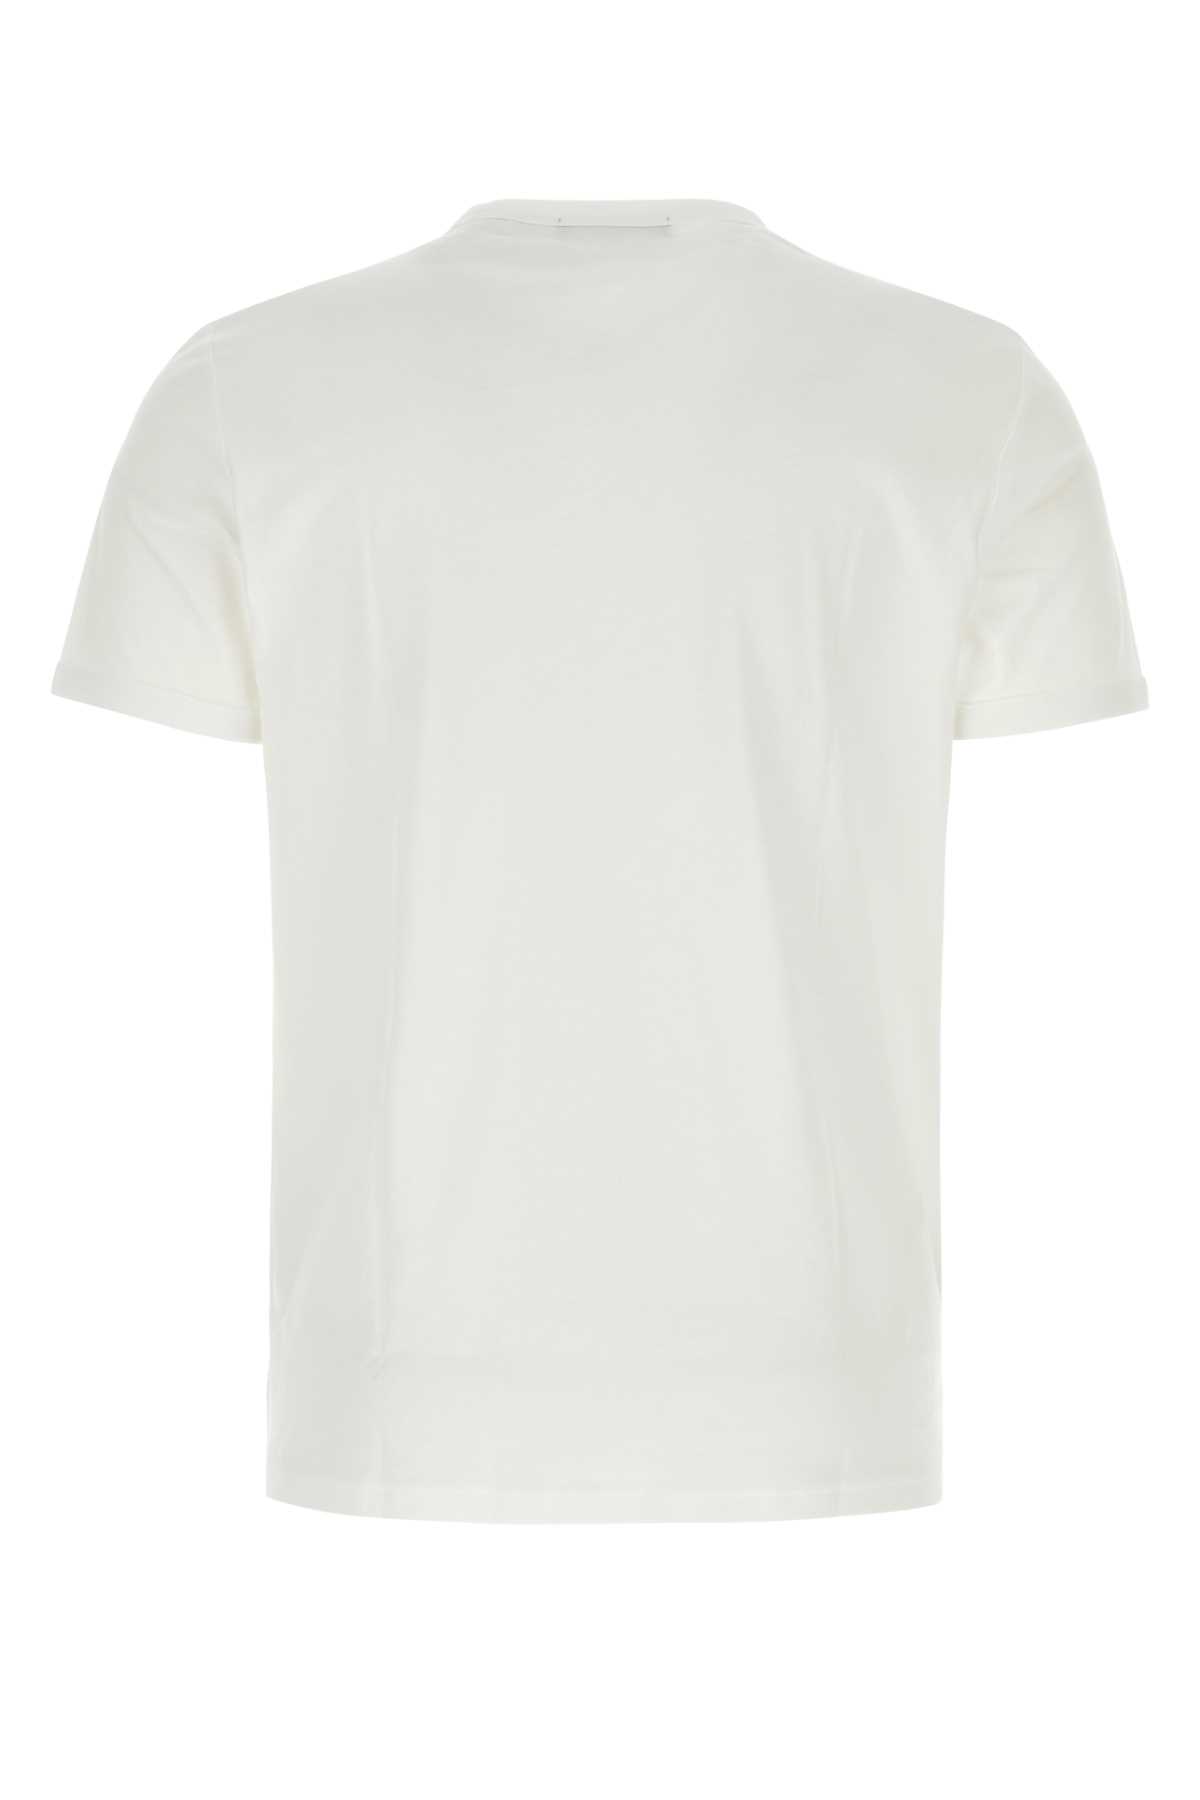 Fred Perry White Cotton T-shirt In 100